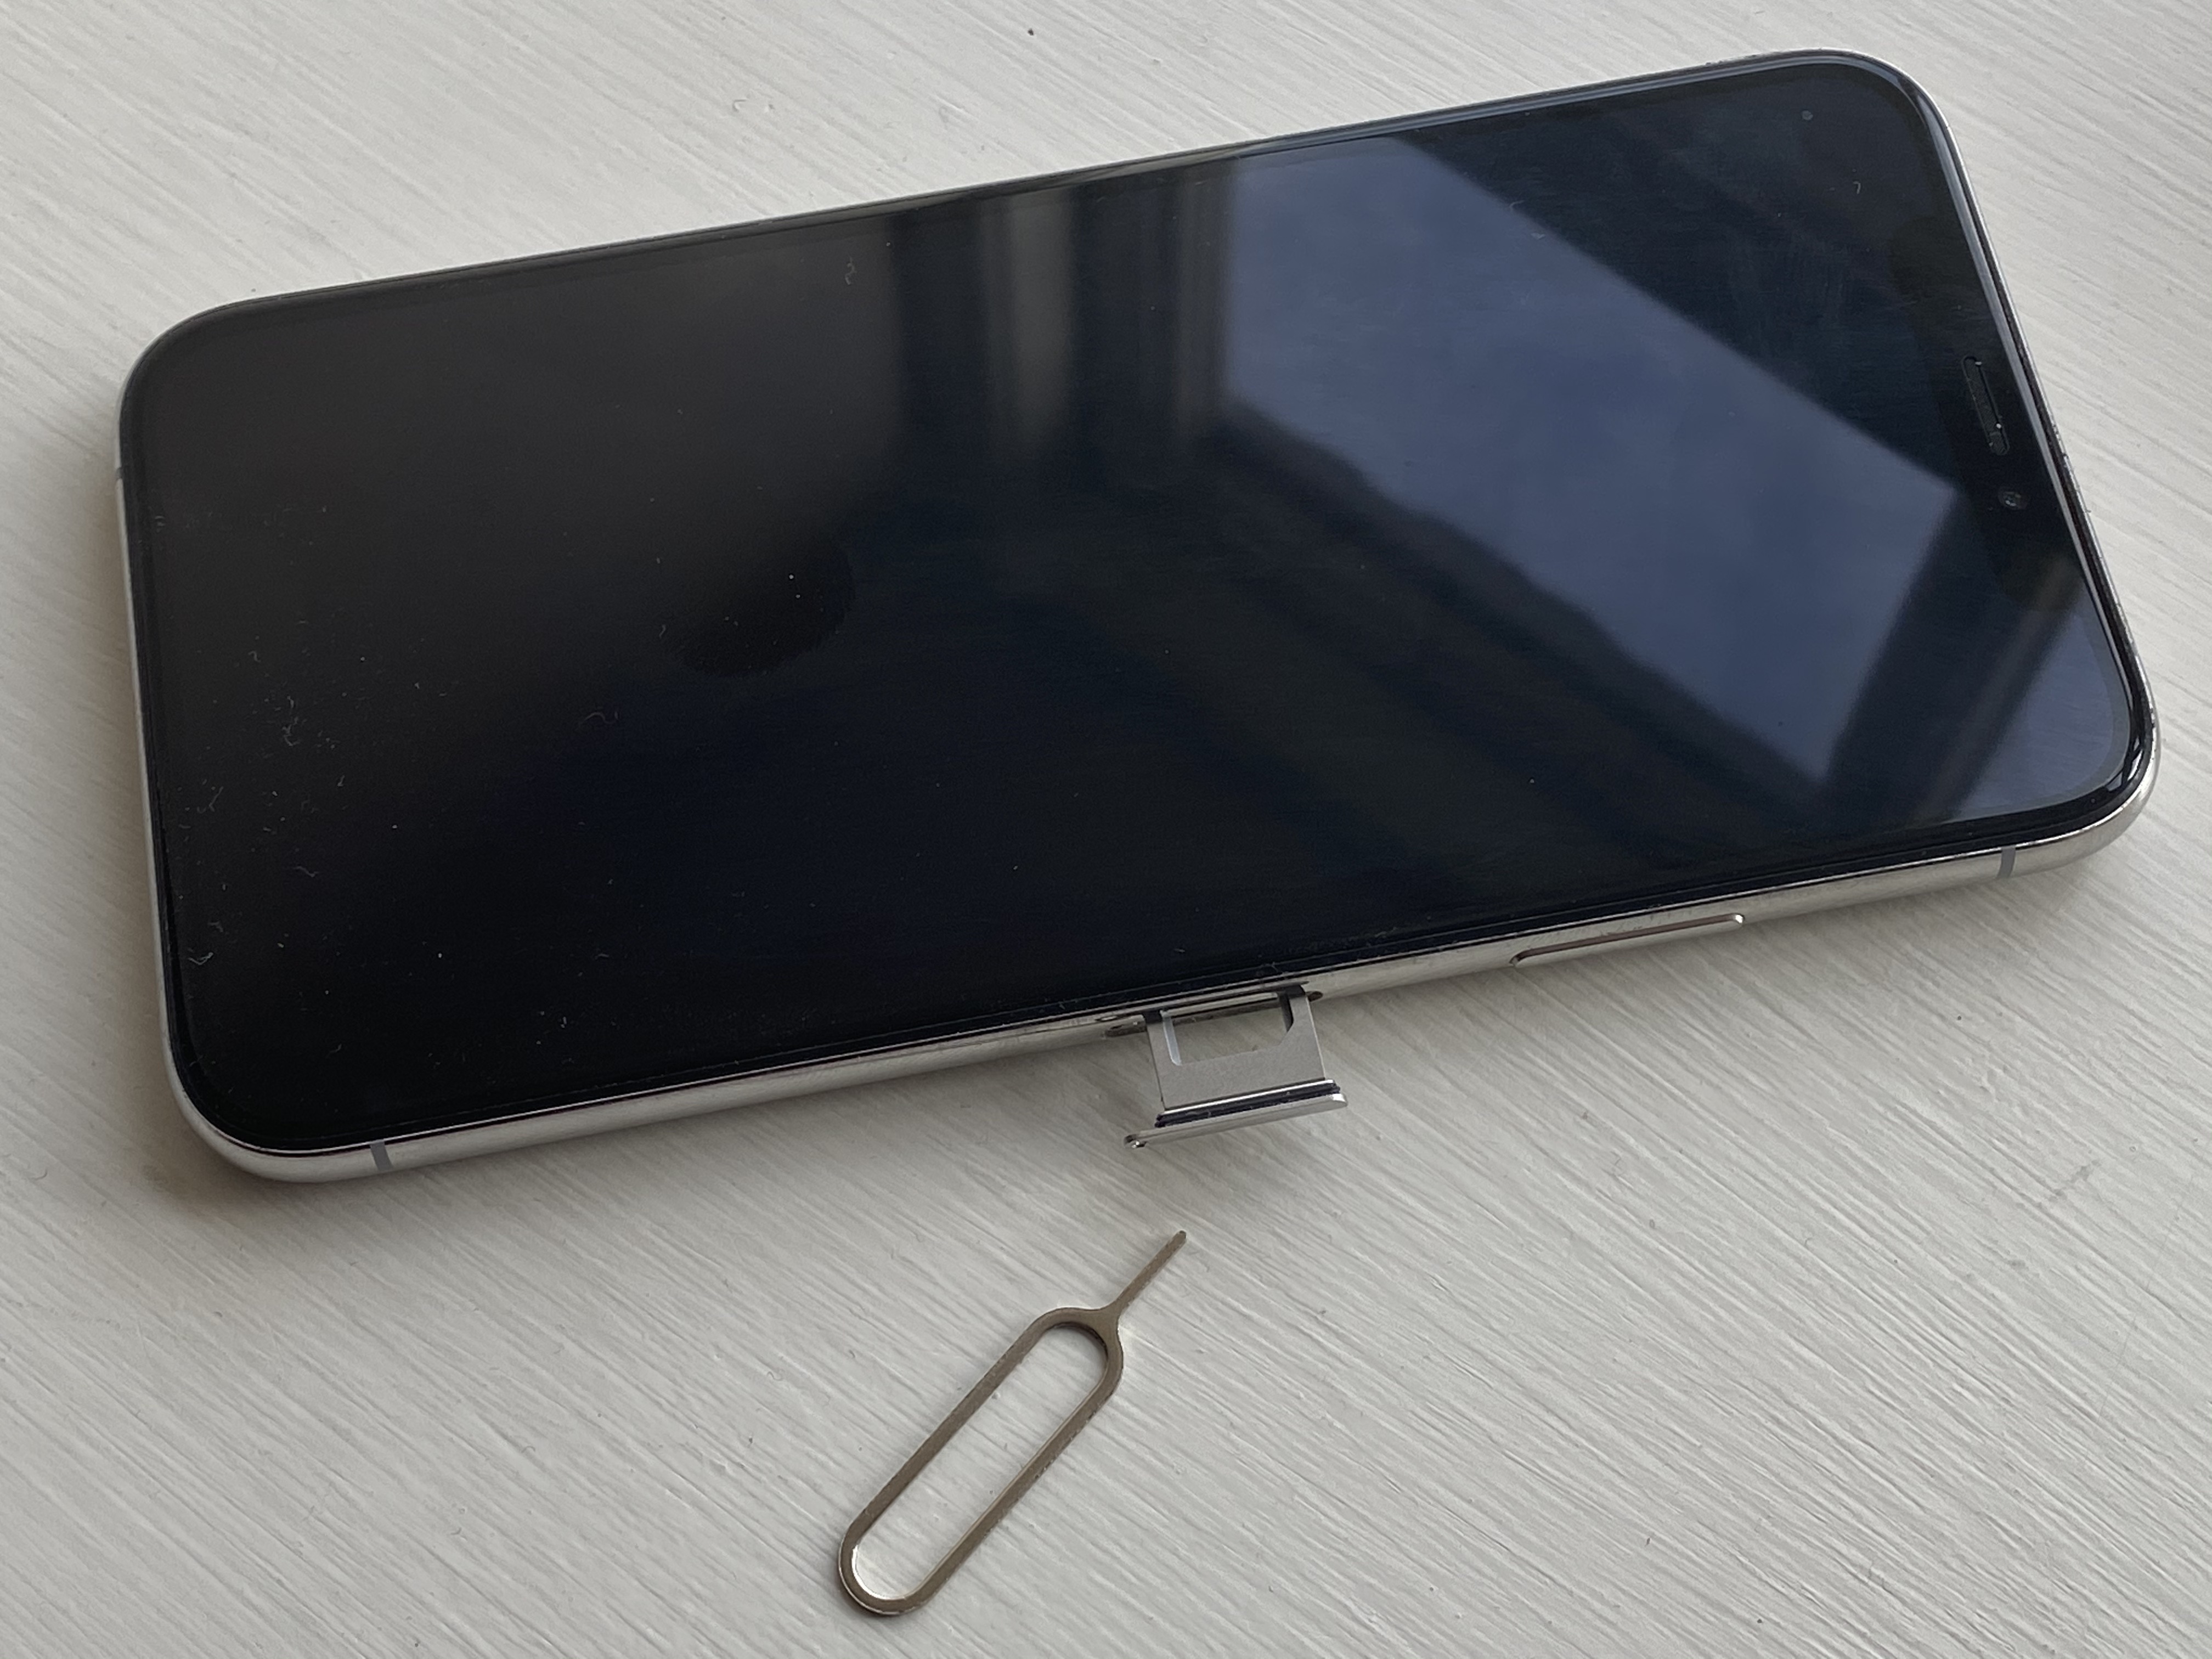 How to Remove the SIM Card From an iPhone or Cellular iPad - MacRumors